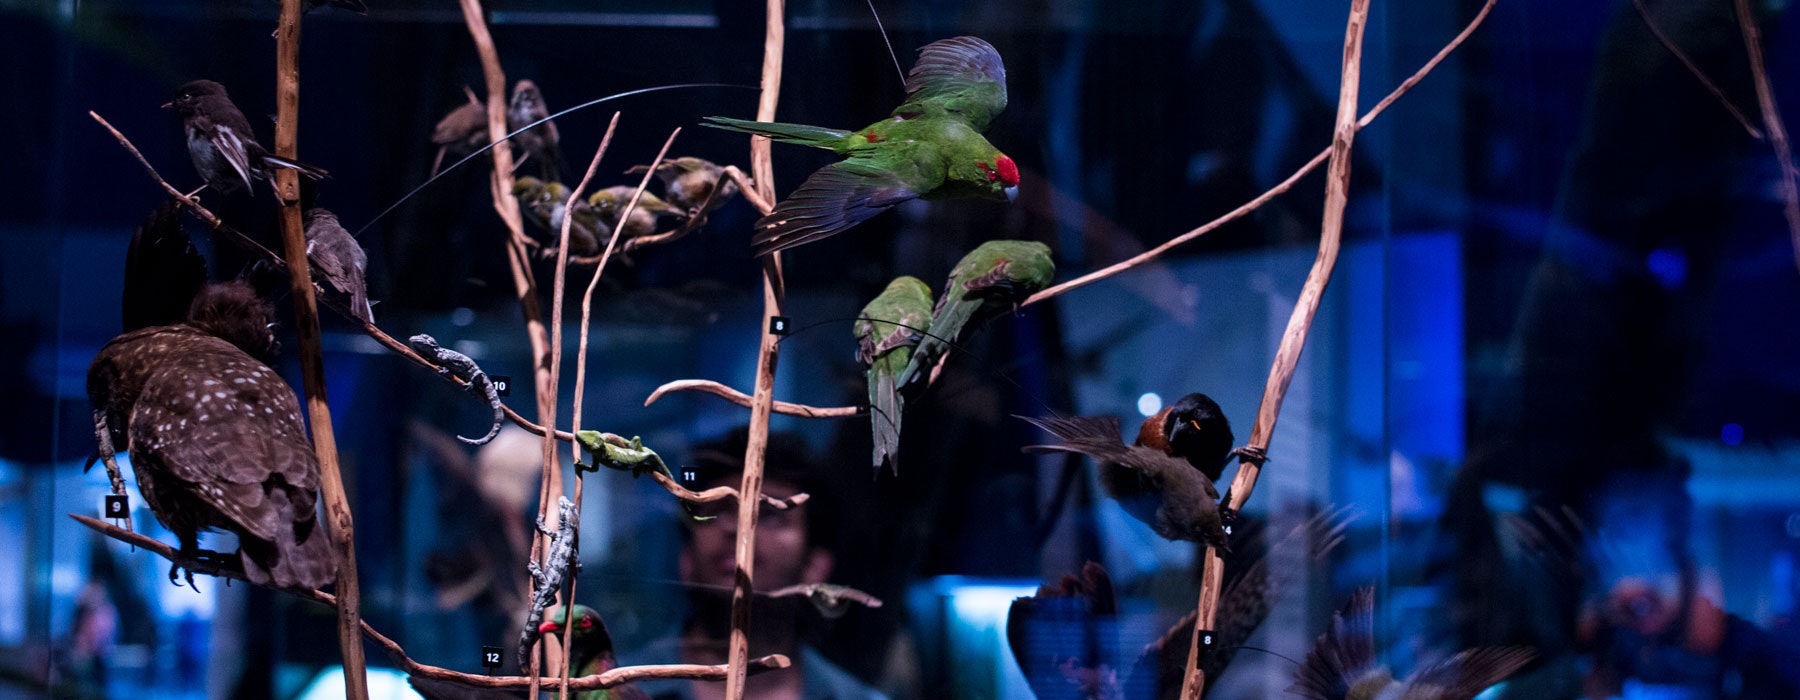 Taxidermy birds in the Mountains to Sea exhibition